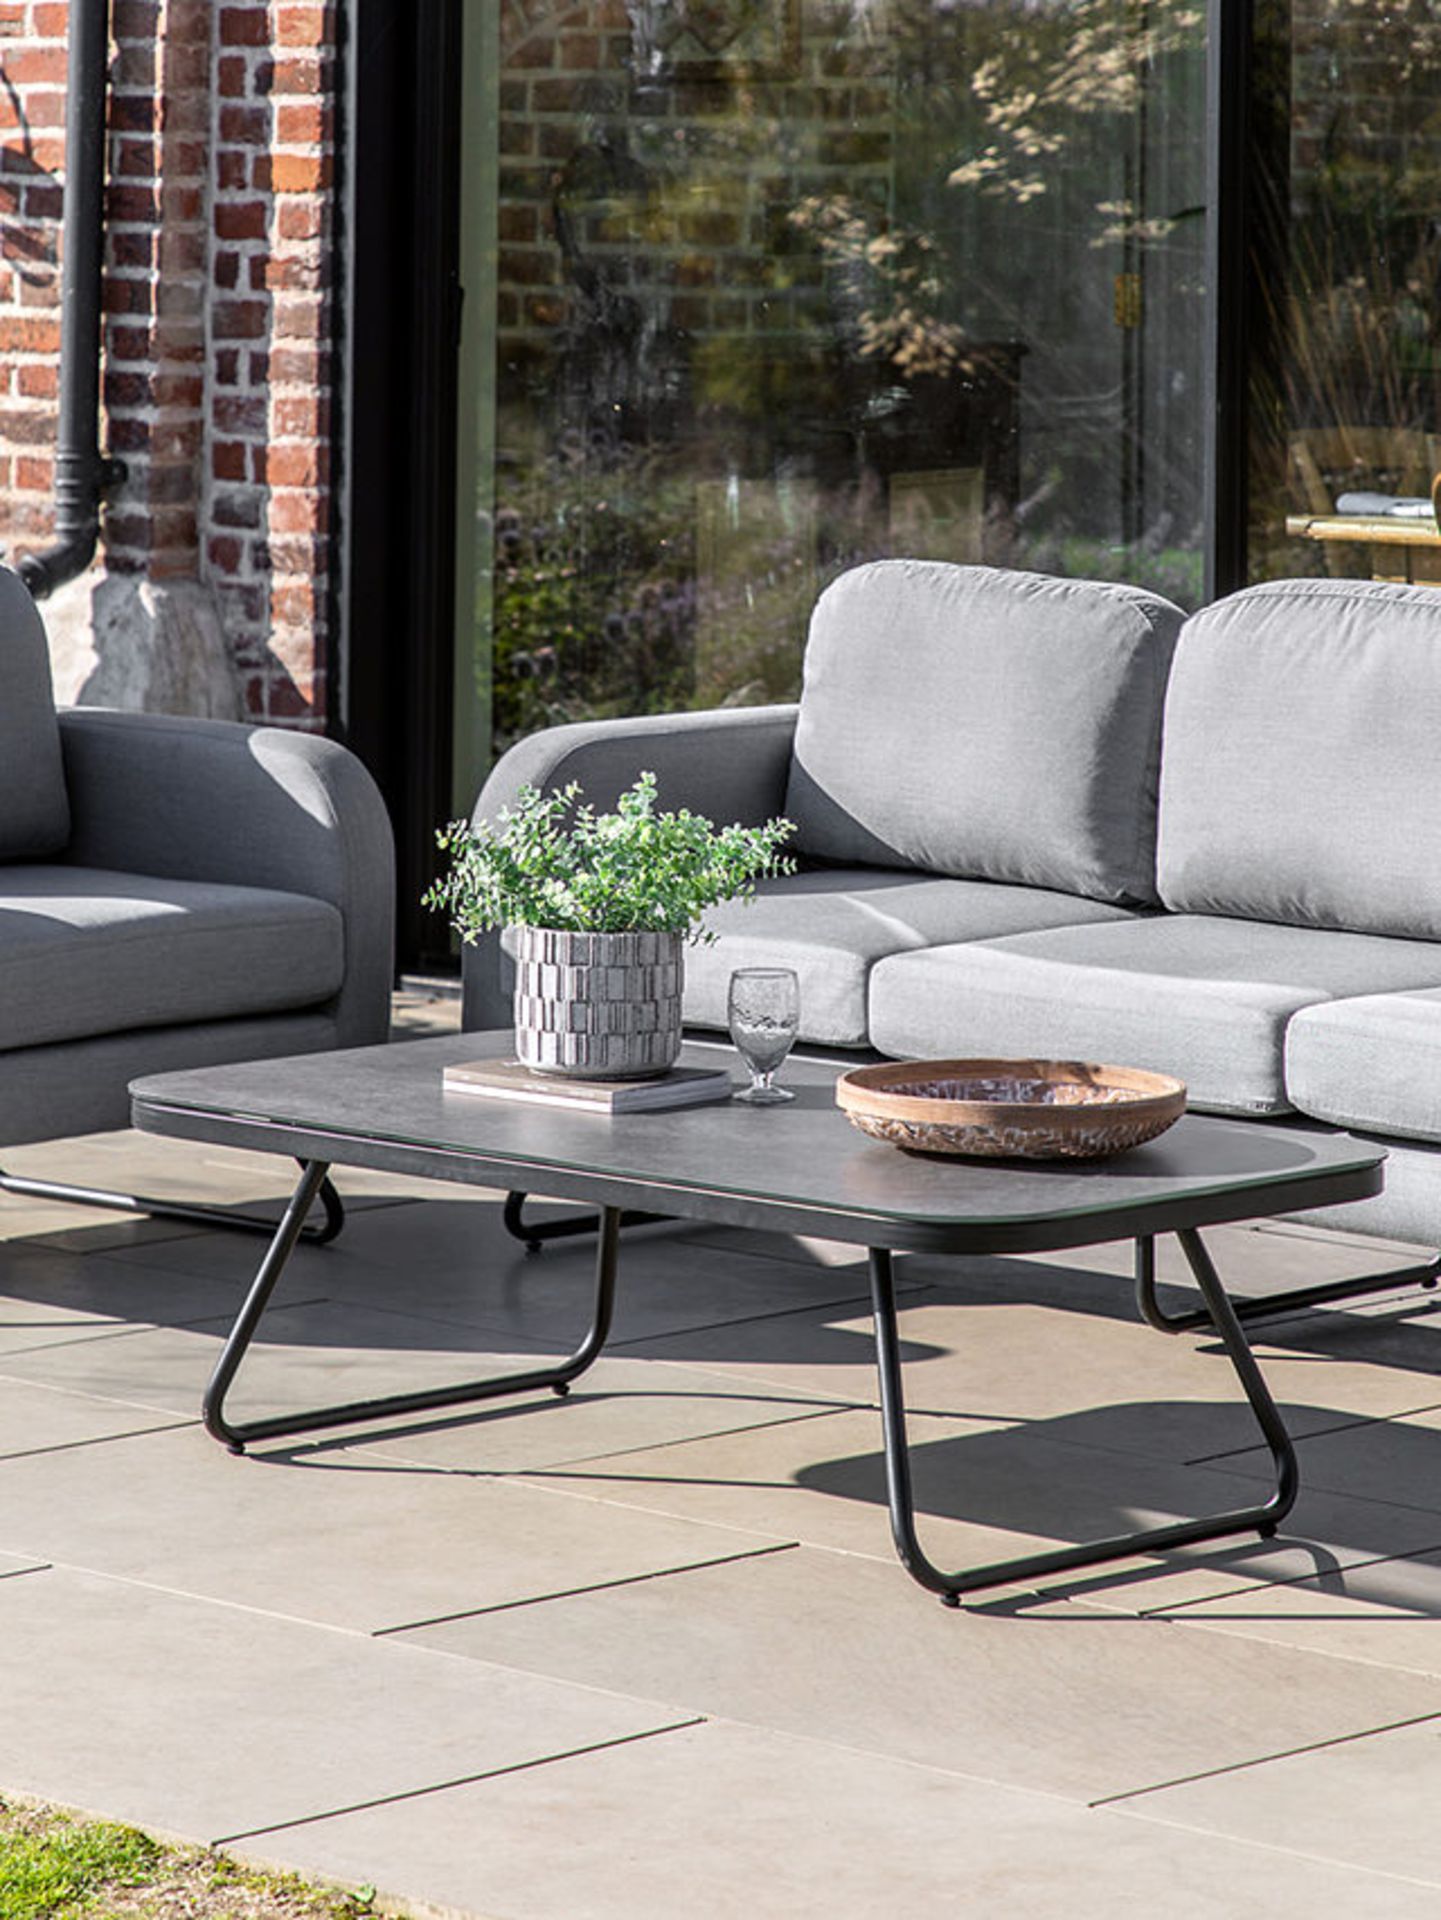 John Lewis Gallery Askern 5-Seater Garden Lounging Set, Charcoal - PRICED £4,500 - Image 6 of 8